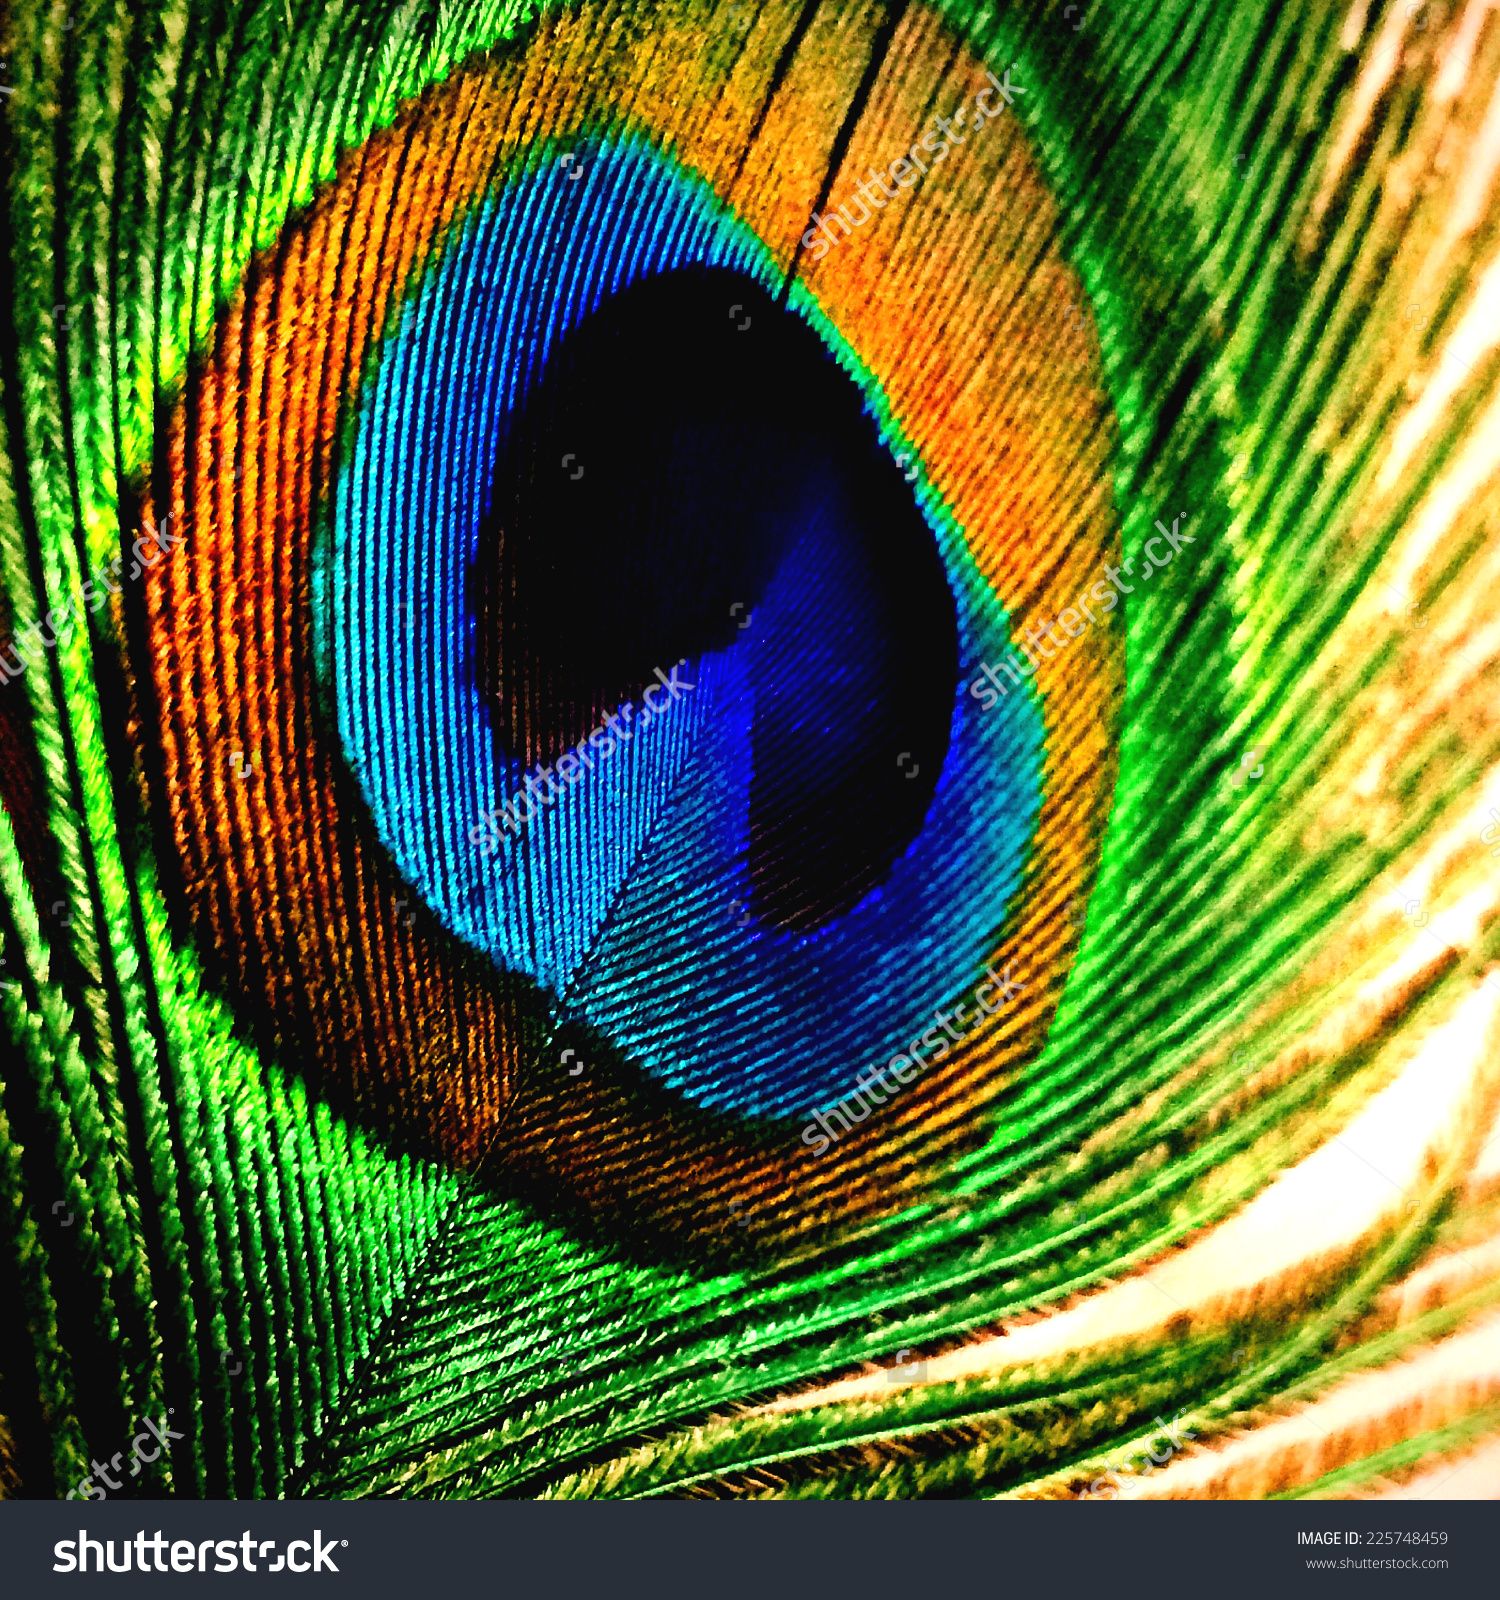 Peacock Feather Close- Up Stock Photo 225748459 : Shutterstock ...